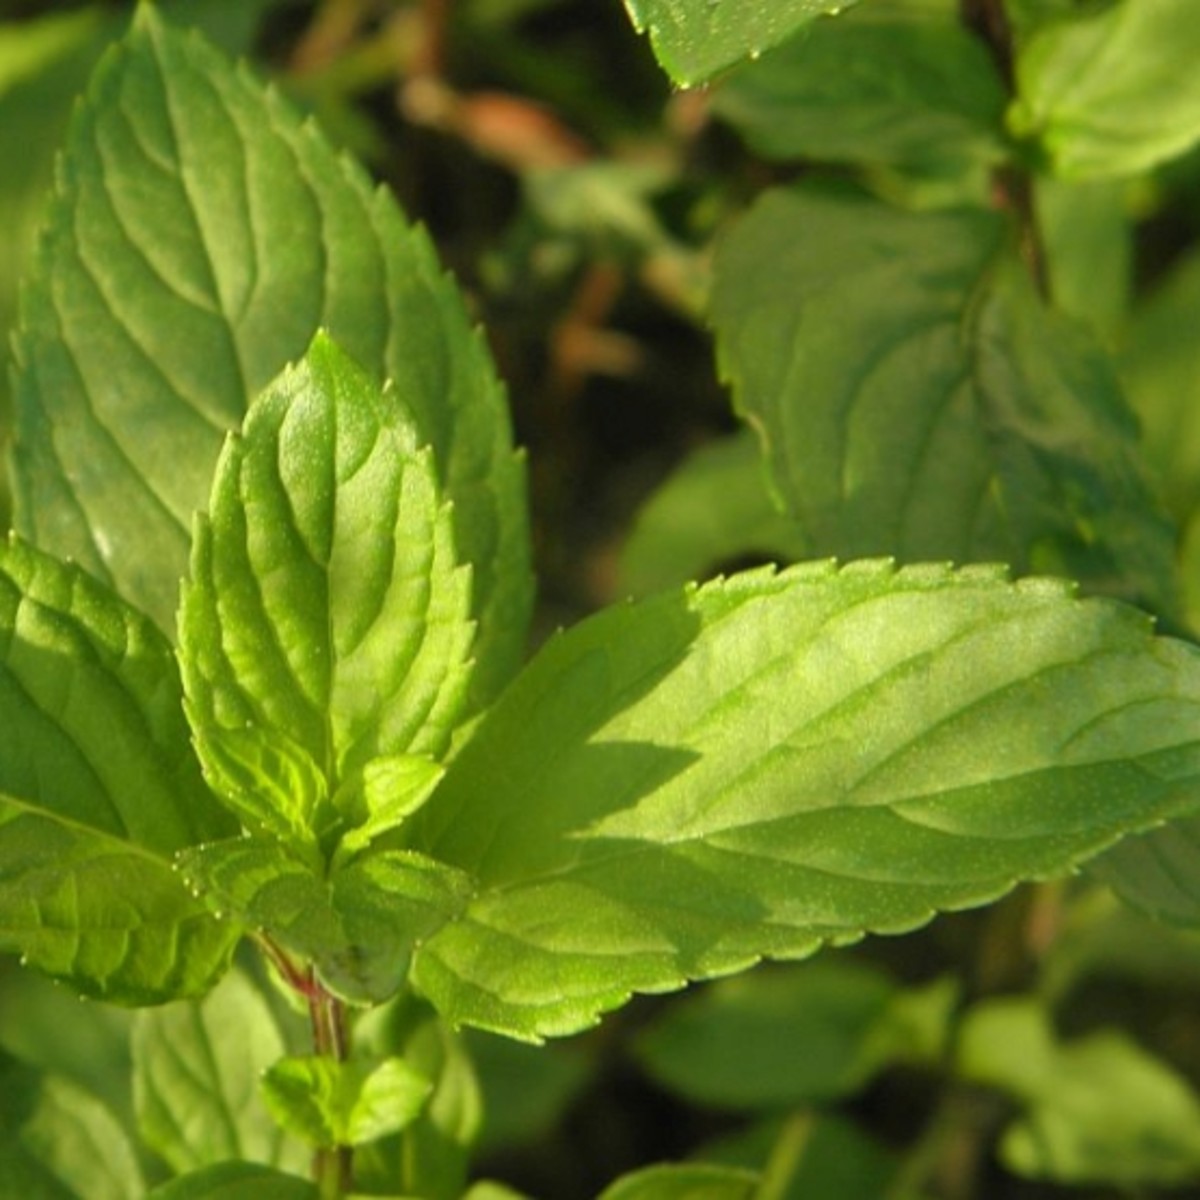 Lemon balm leaf can be made into a relaxing tea for stress and anxiety